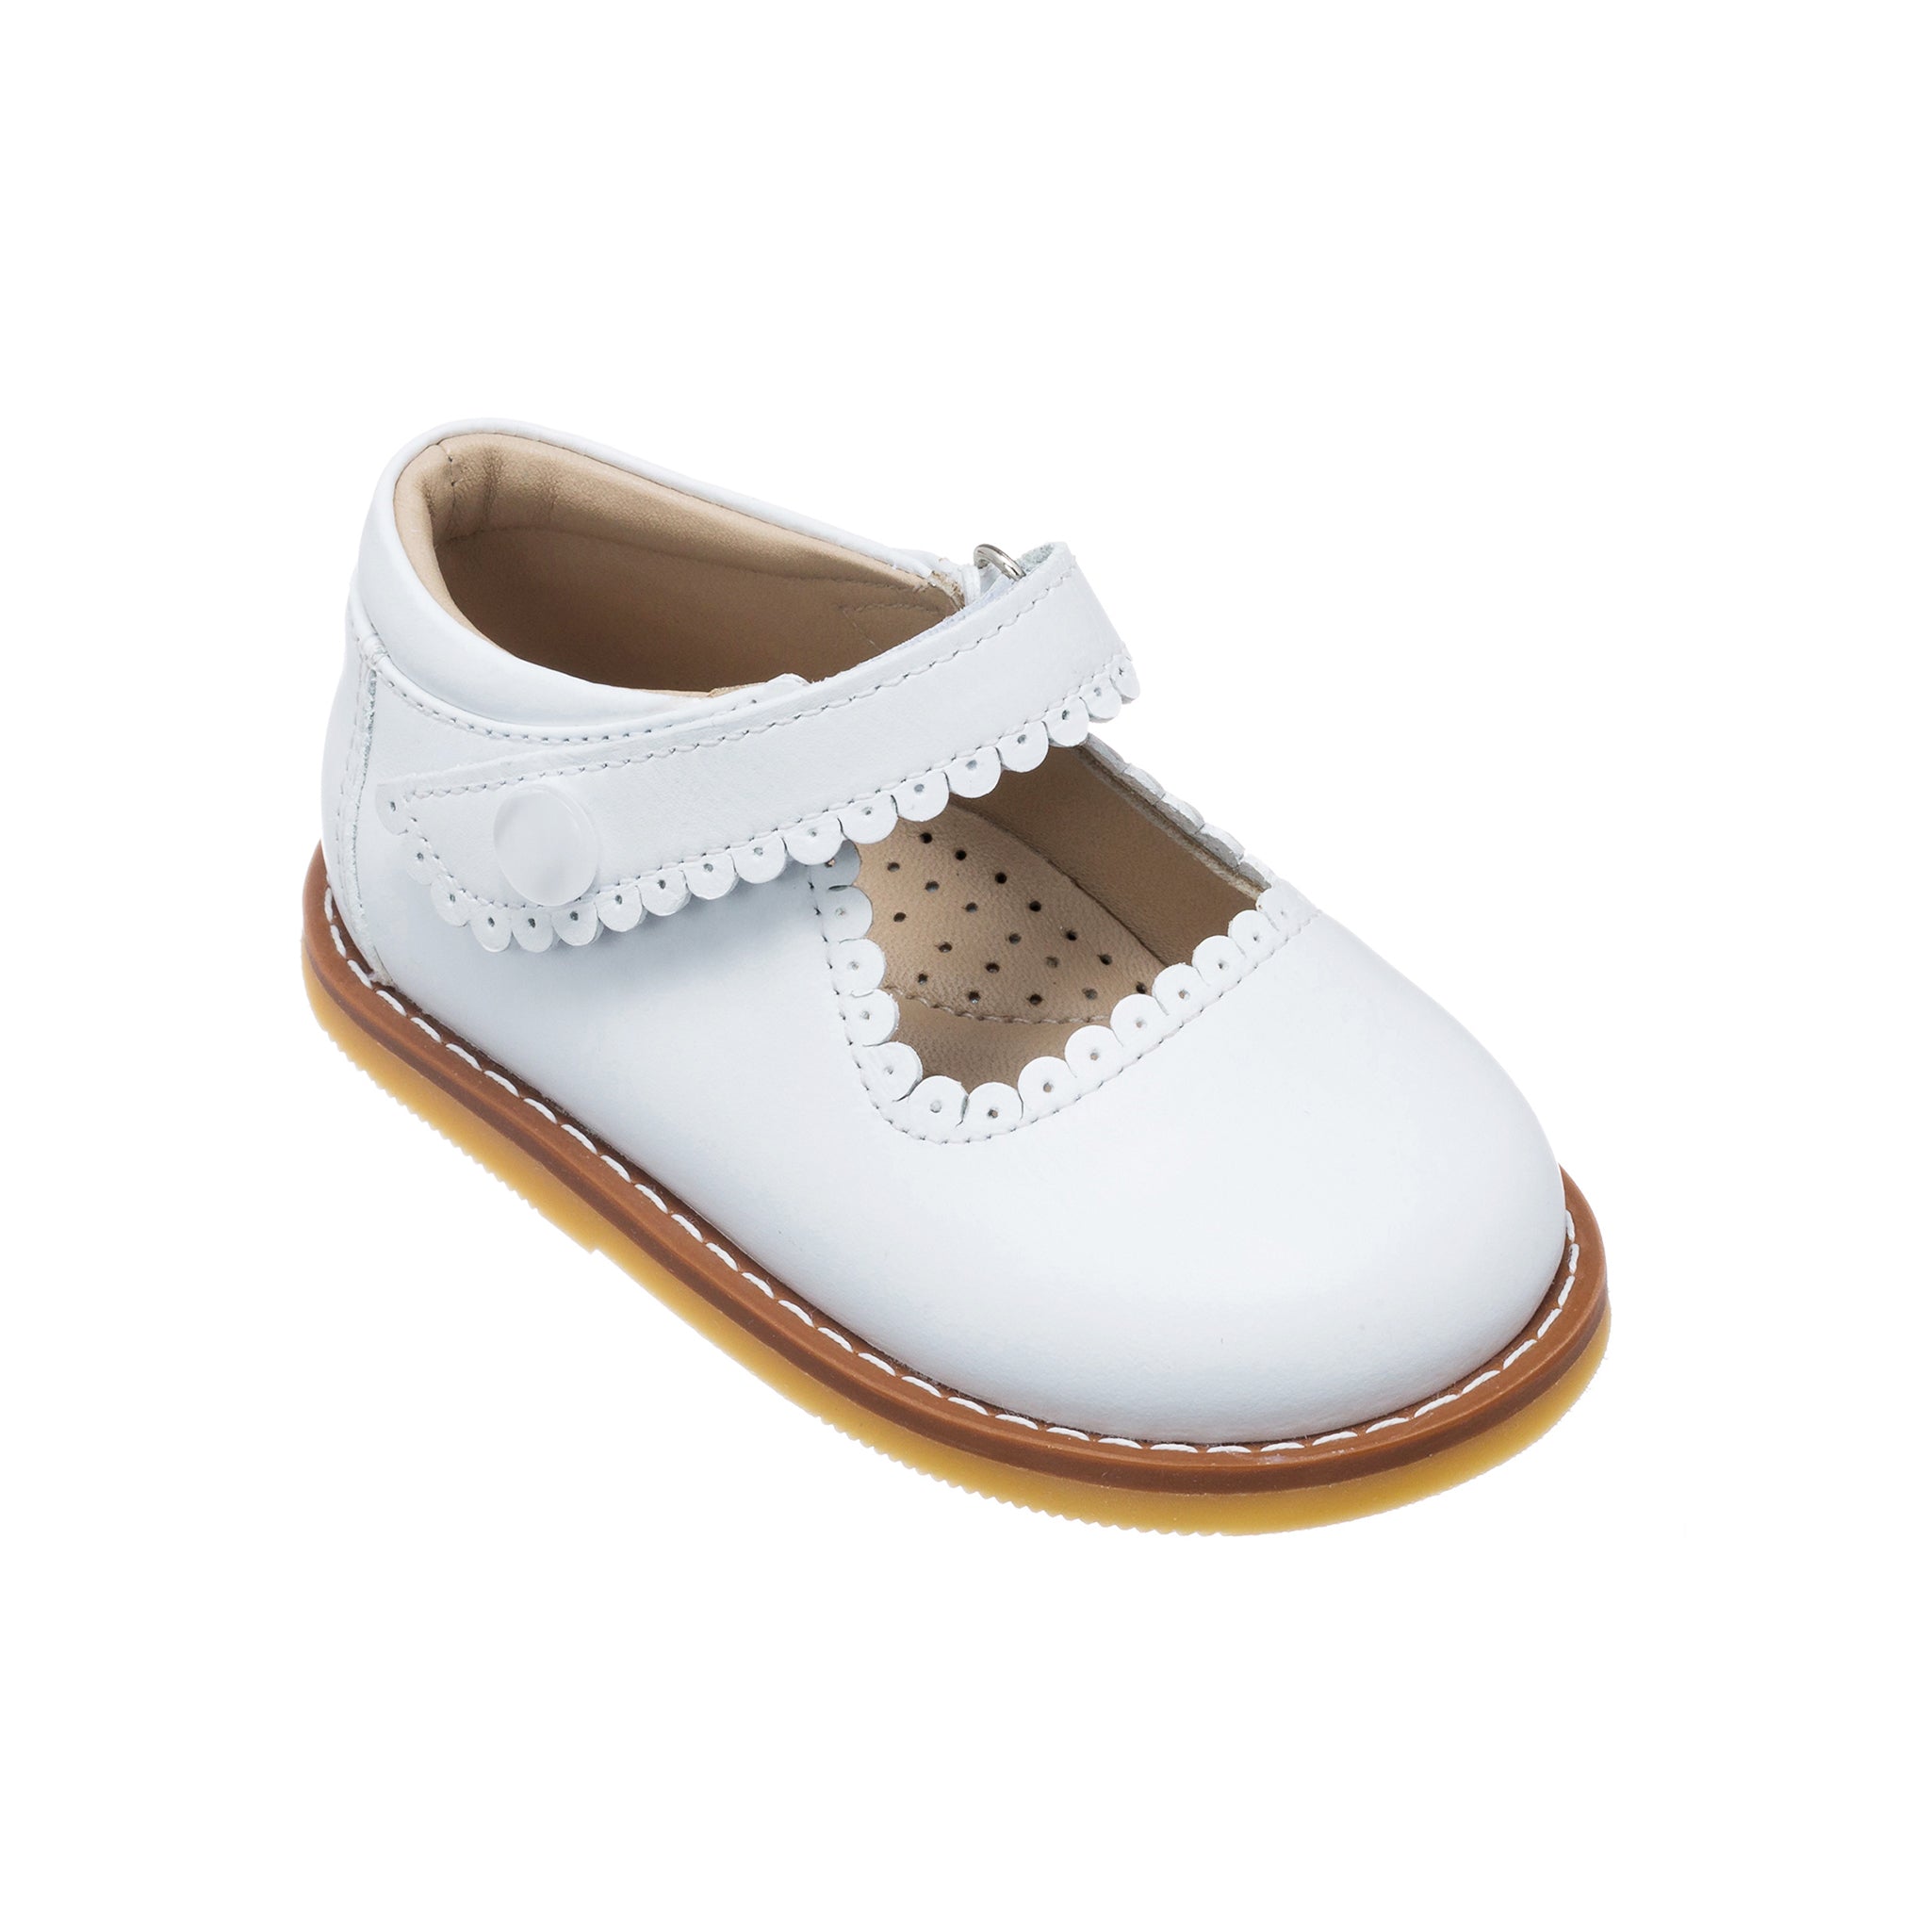 white mary jane shoes for girls